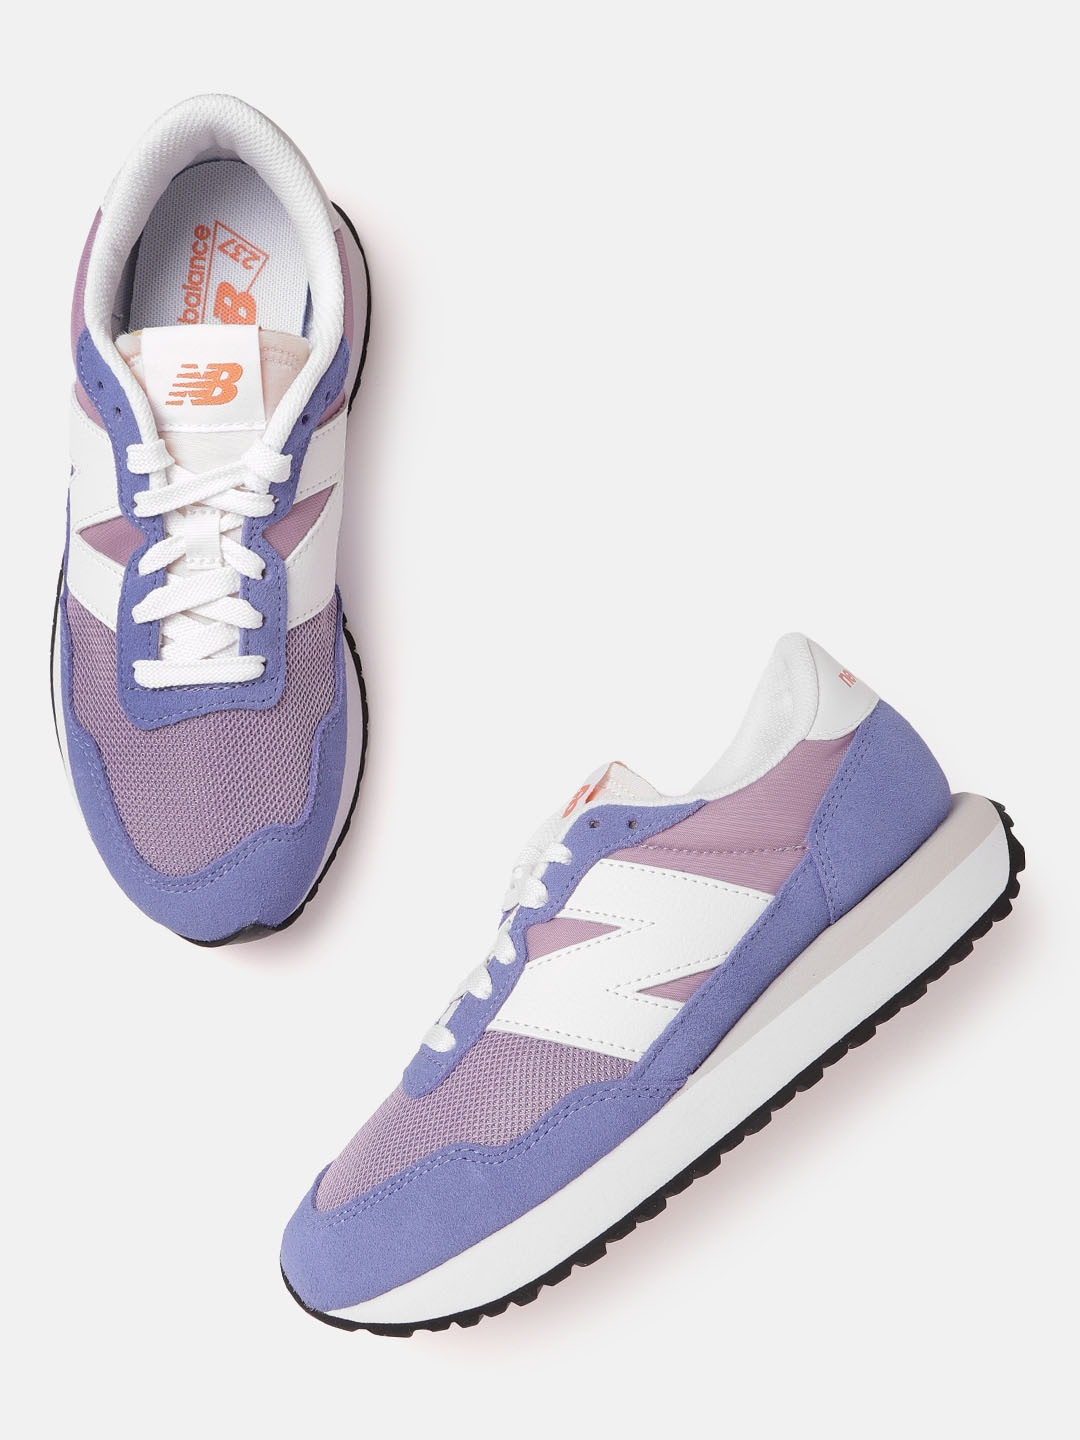 New Balance Women Purple & Blue Colourblocked Suede Sneakers Price in India